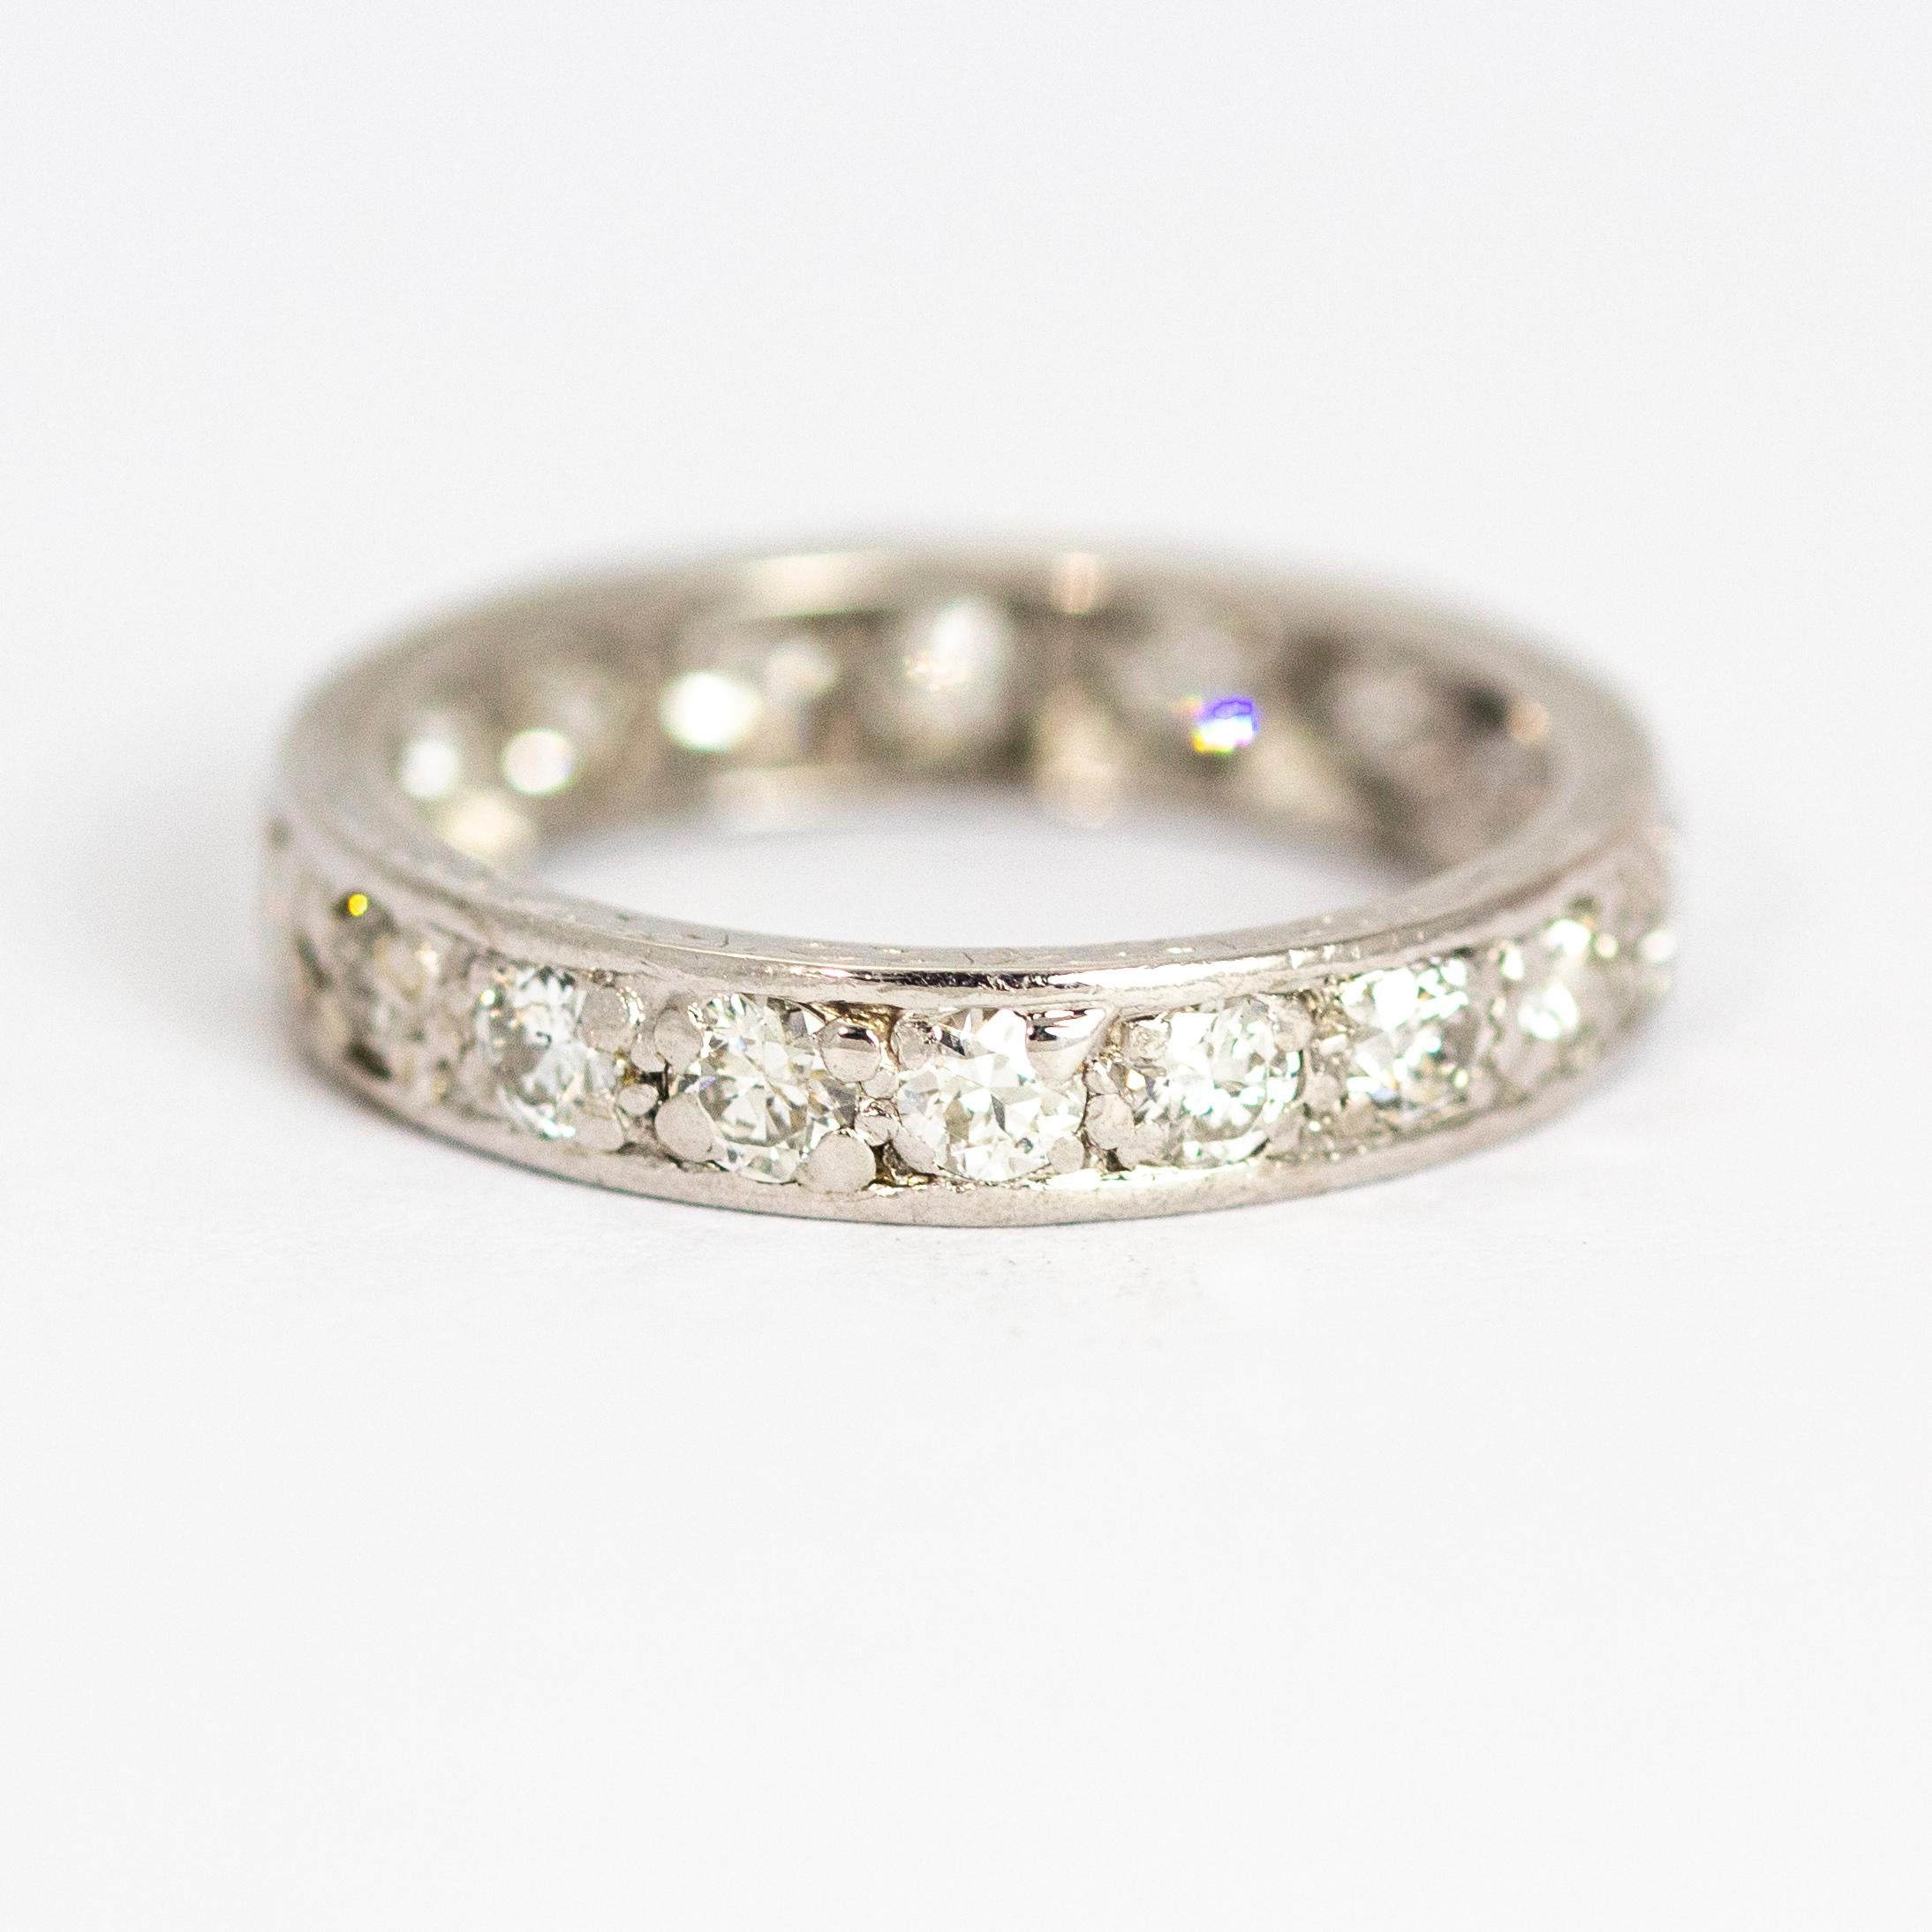 This sparkling eternity band holds a total of 2 carats of brilliant cut Diamonds all set in platinum. The shimmer on this ring is simply stunning! To add to the beauty of this ring there is soft engraving in the platinum. 

Ring Size: O or 7